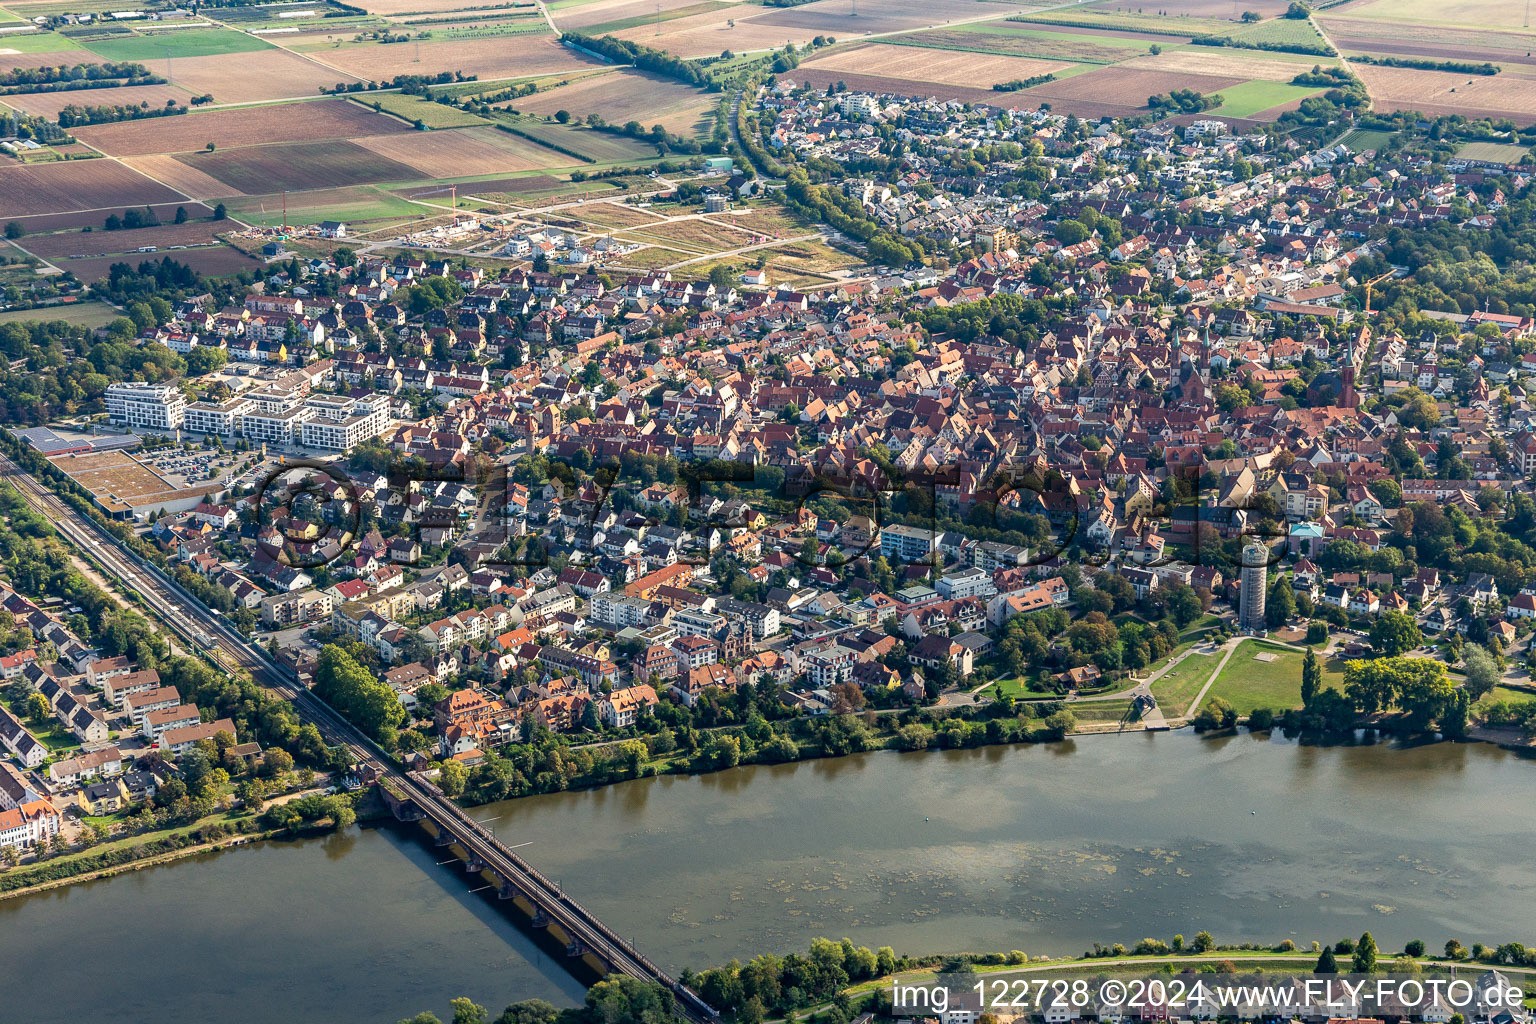 Ladenburg in the state Baden-Wuerttemberg, Germany from above